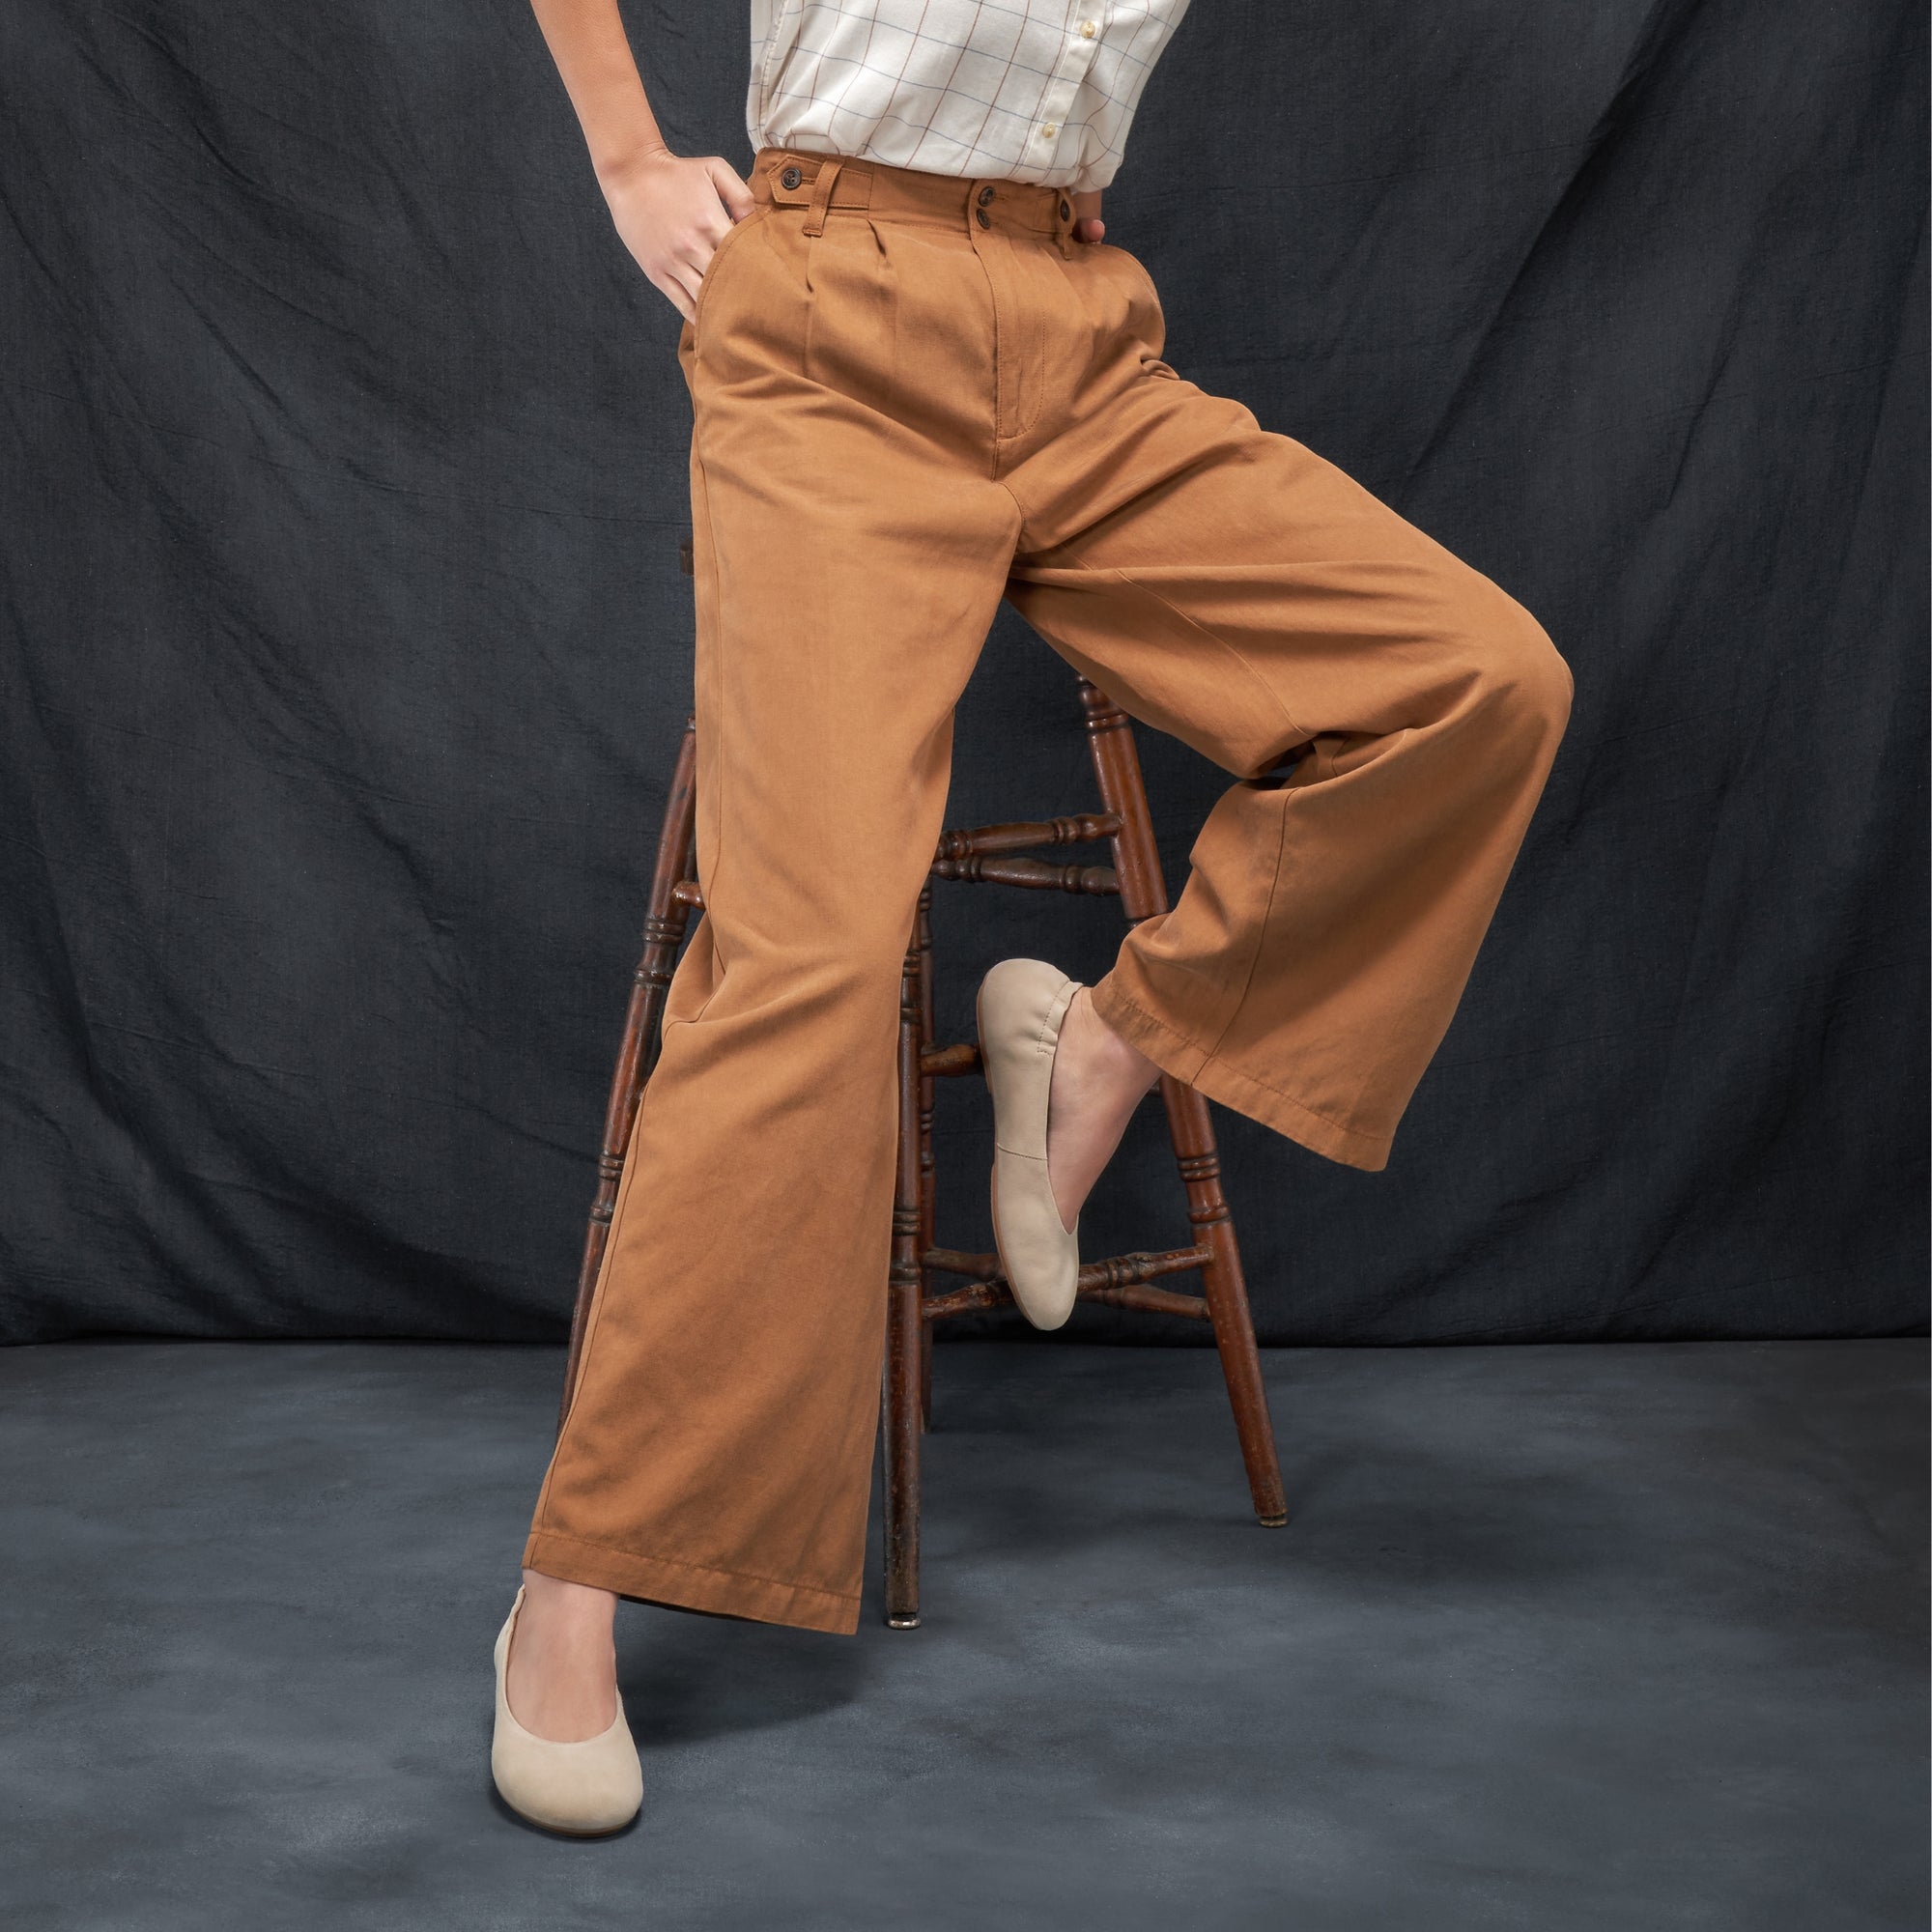 A woman seated casually in tan pants wearing tan leather flats.